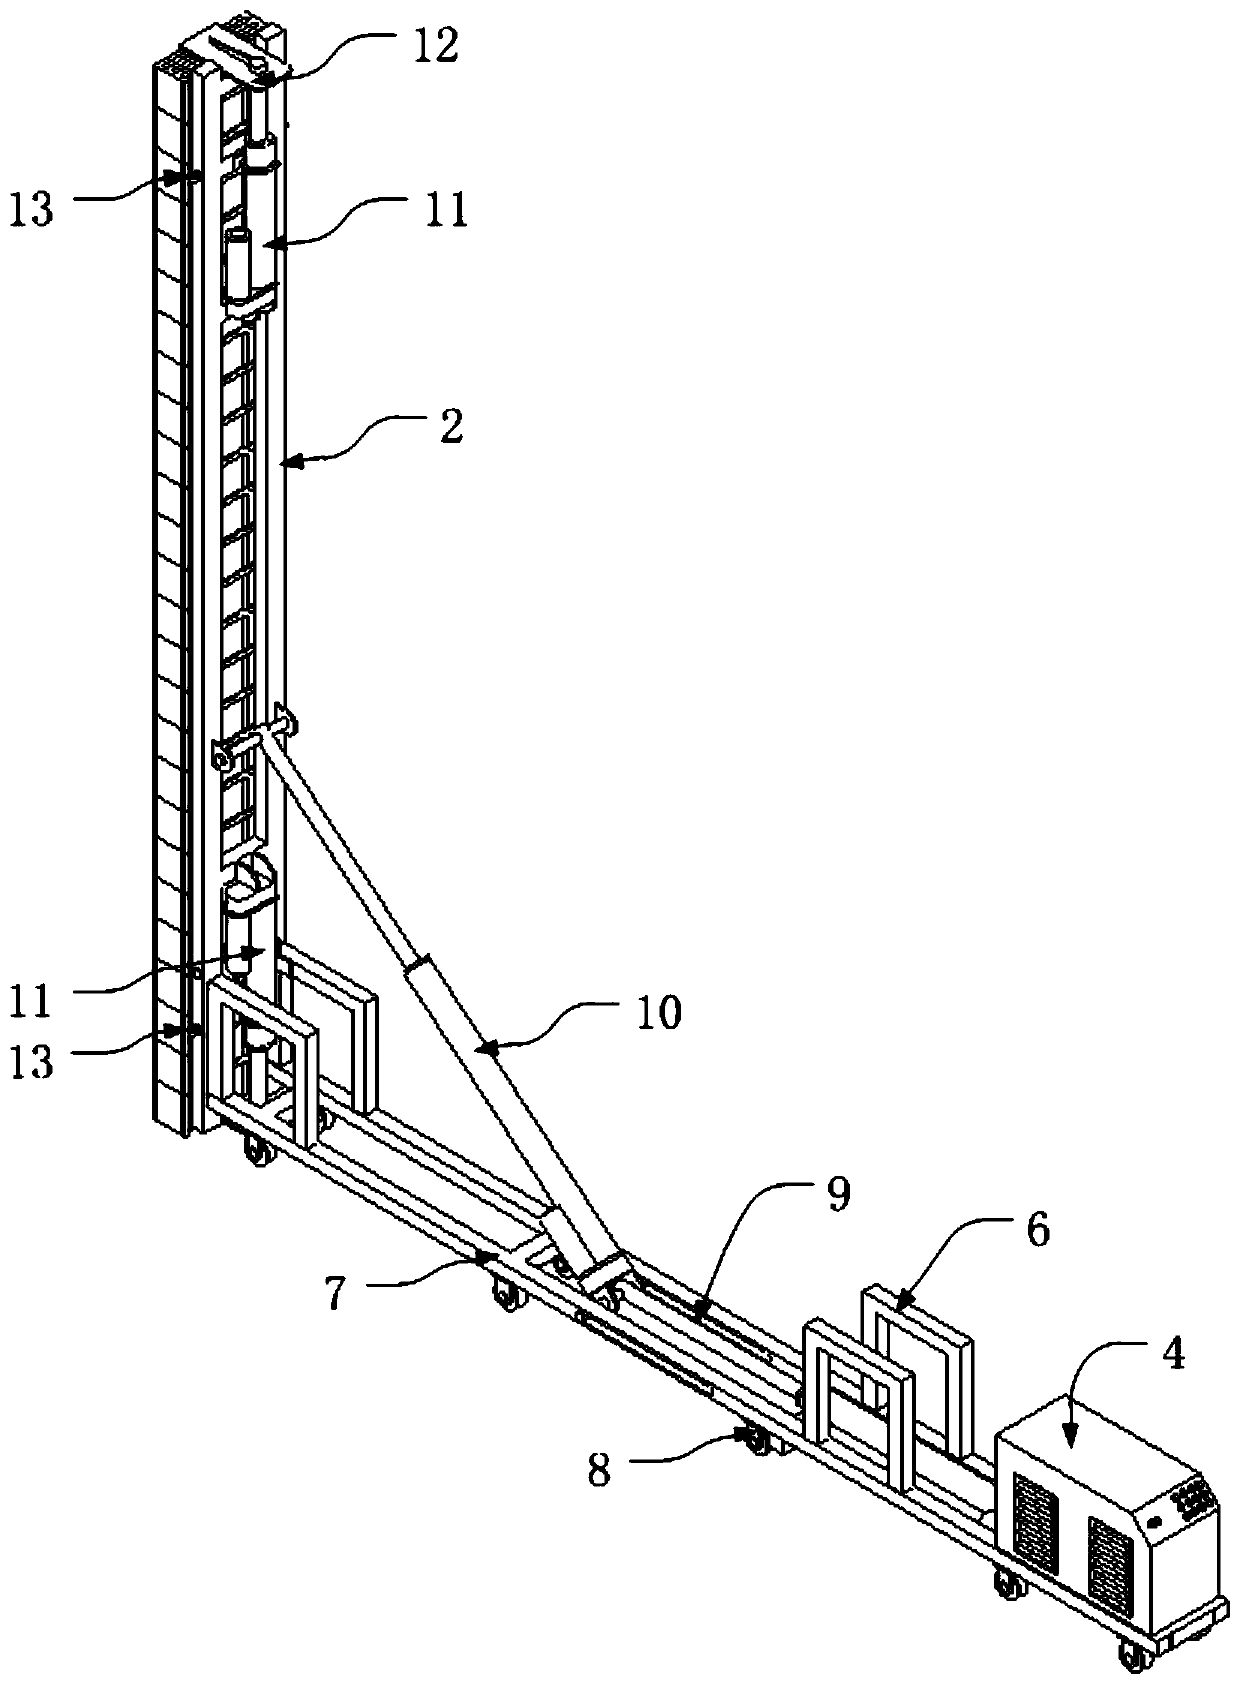 Coke oven checker brick mounting device and construction method therefor